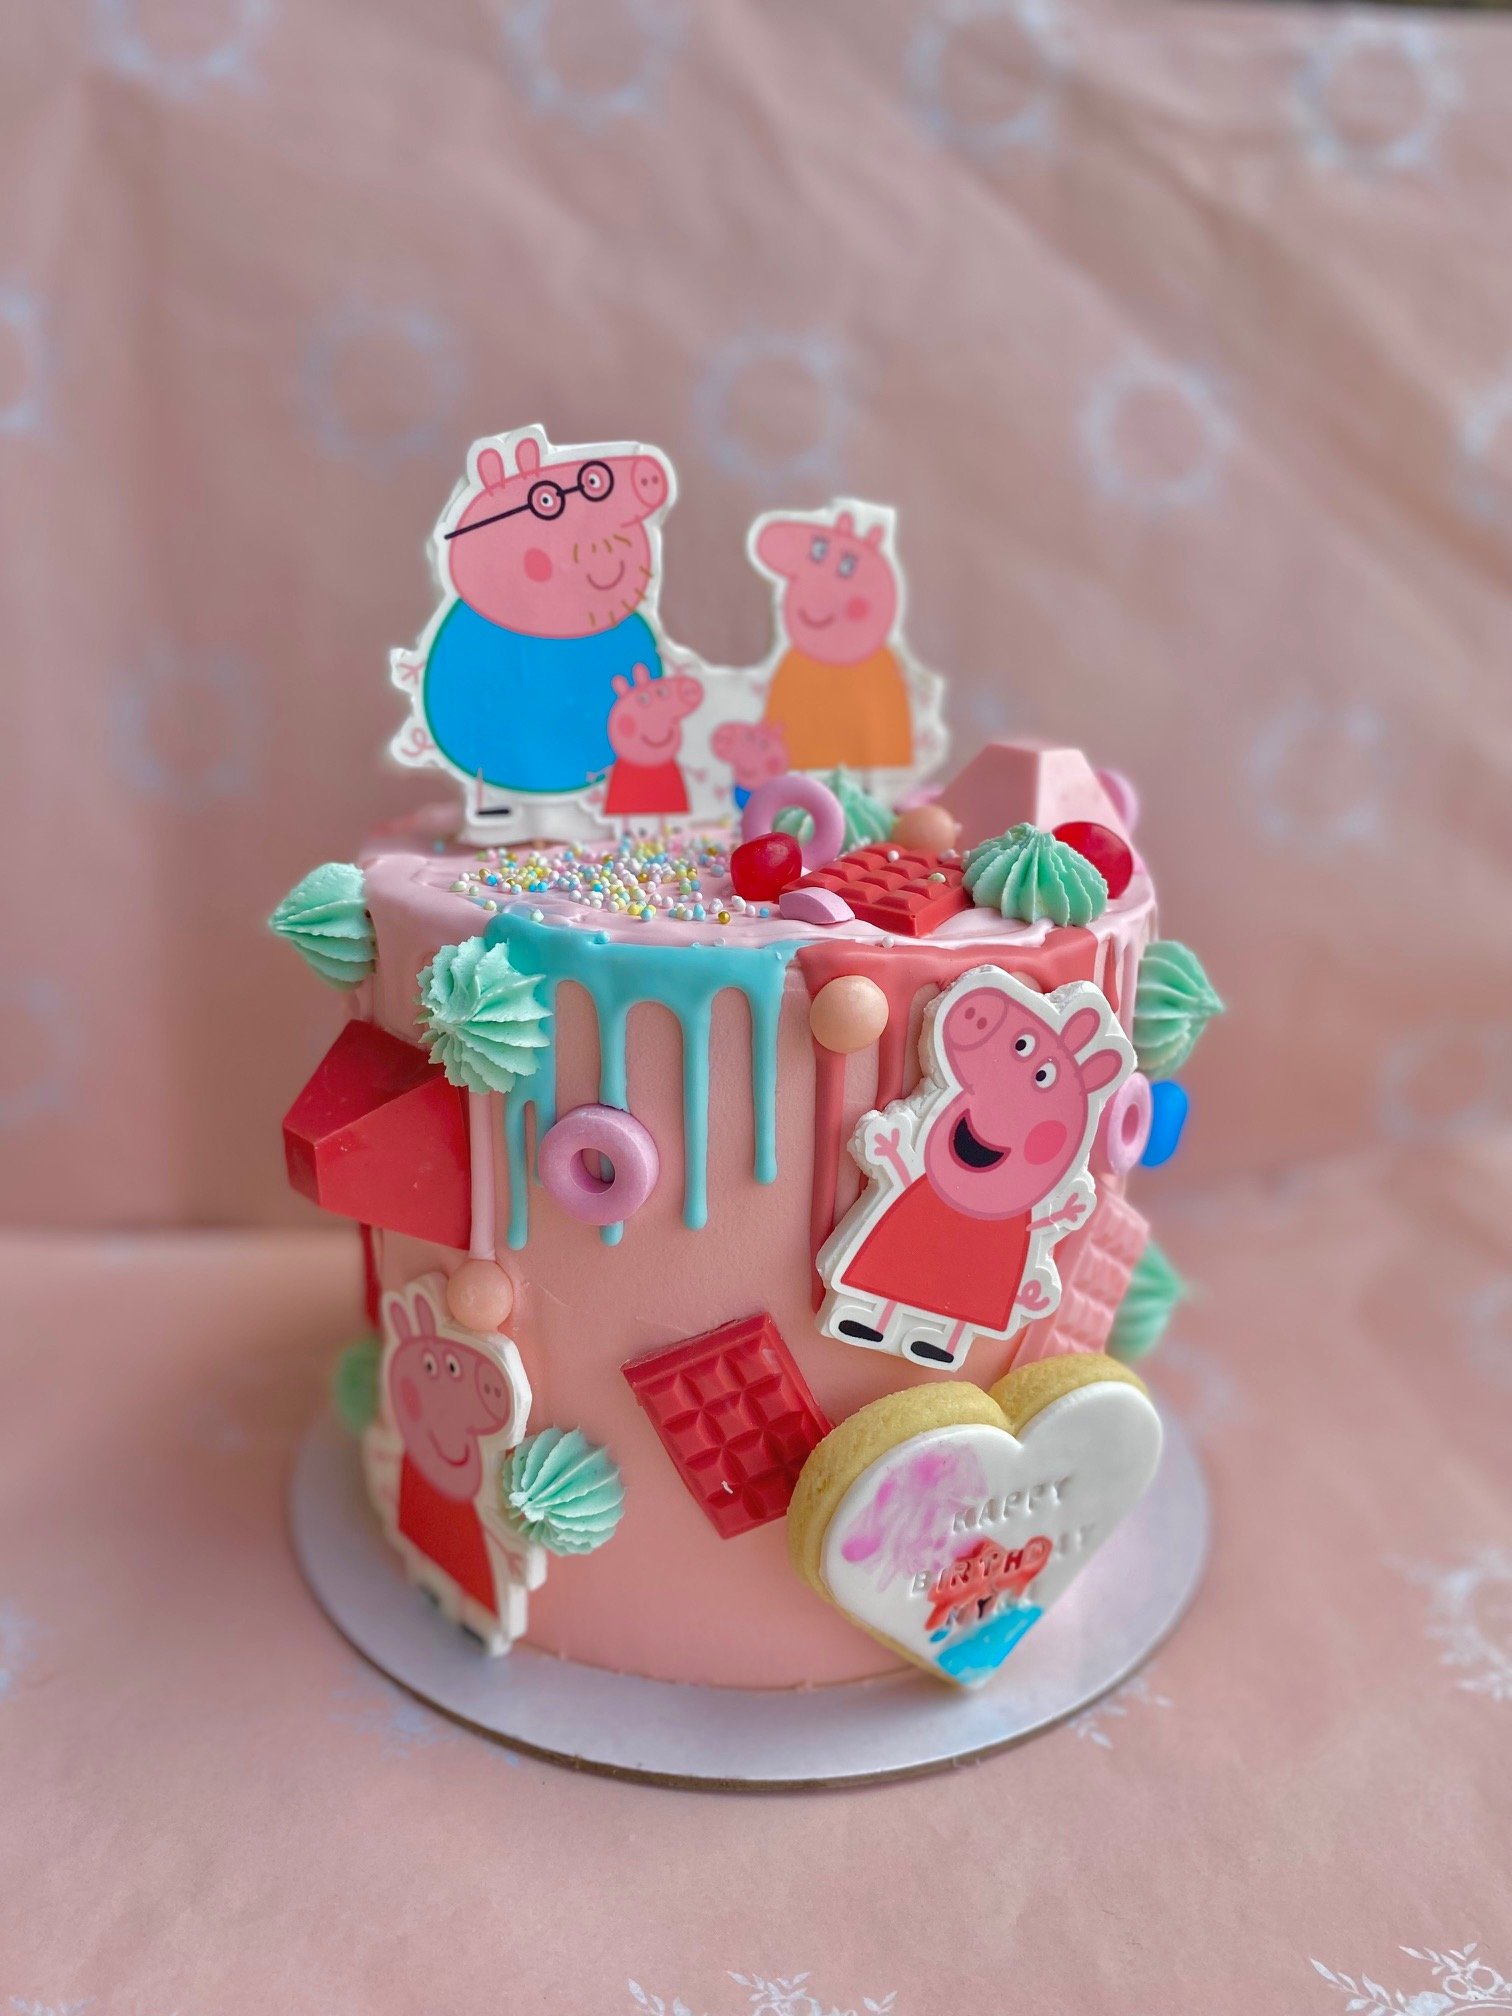 How to make a Peppa Pig cake in 10 easy steps - Confessions Of A Crummy  Mummy